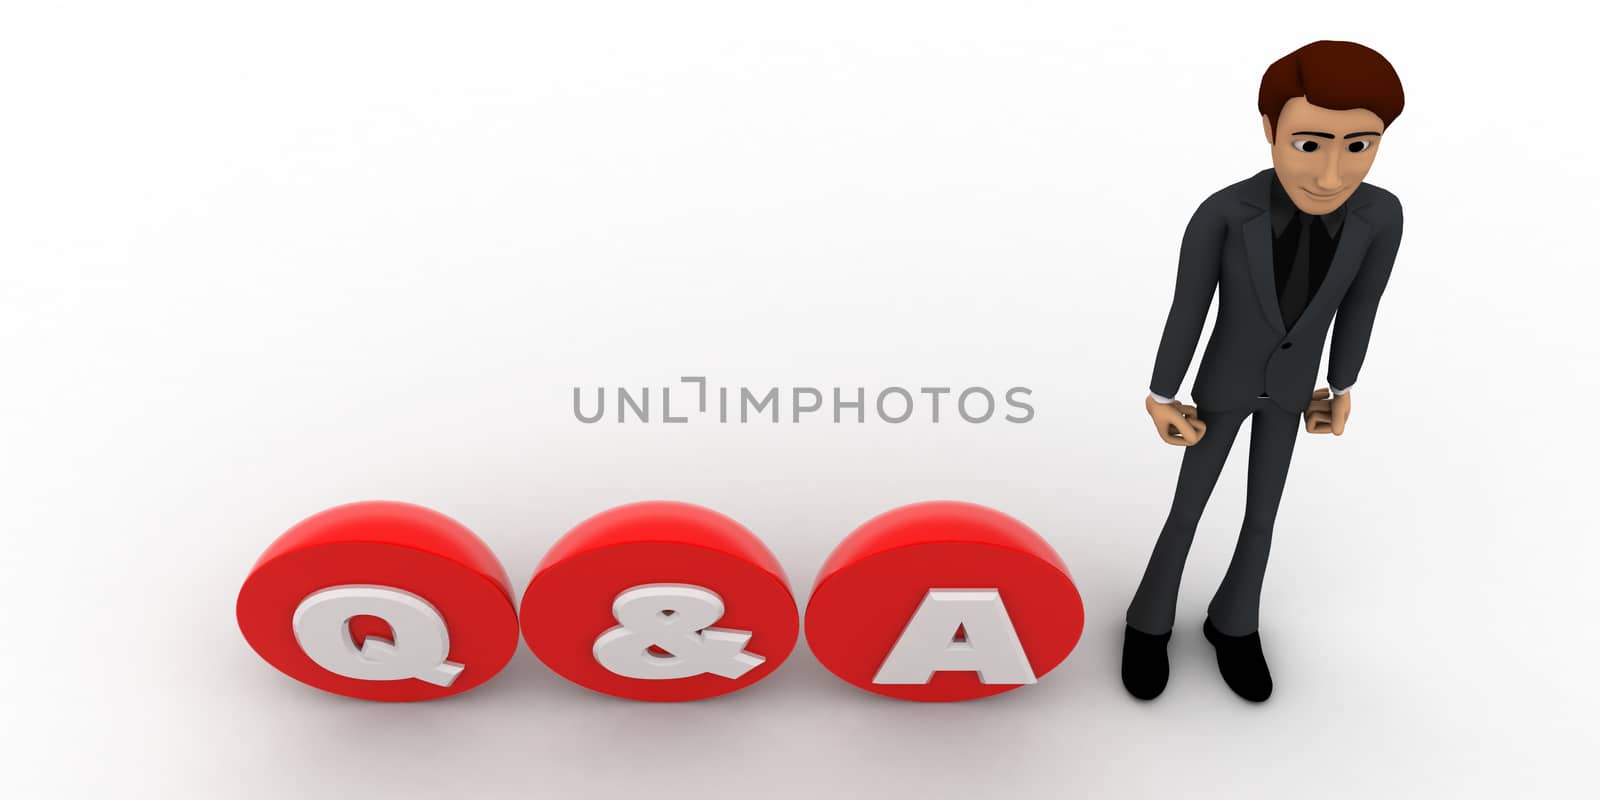 3d man standing with red circular blocks Q&A text concept by touchmenithin@gmail.com